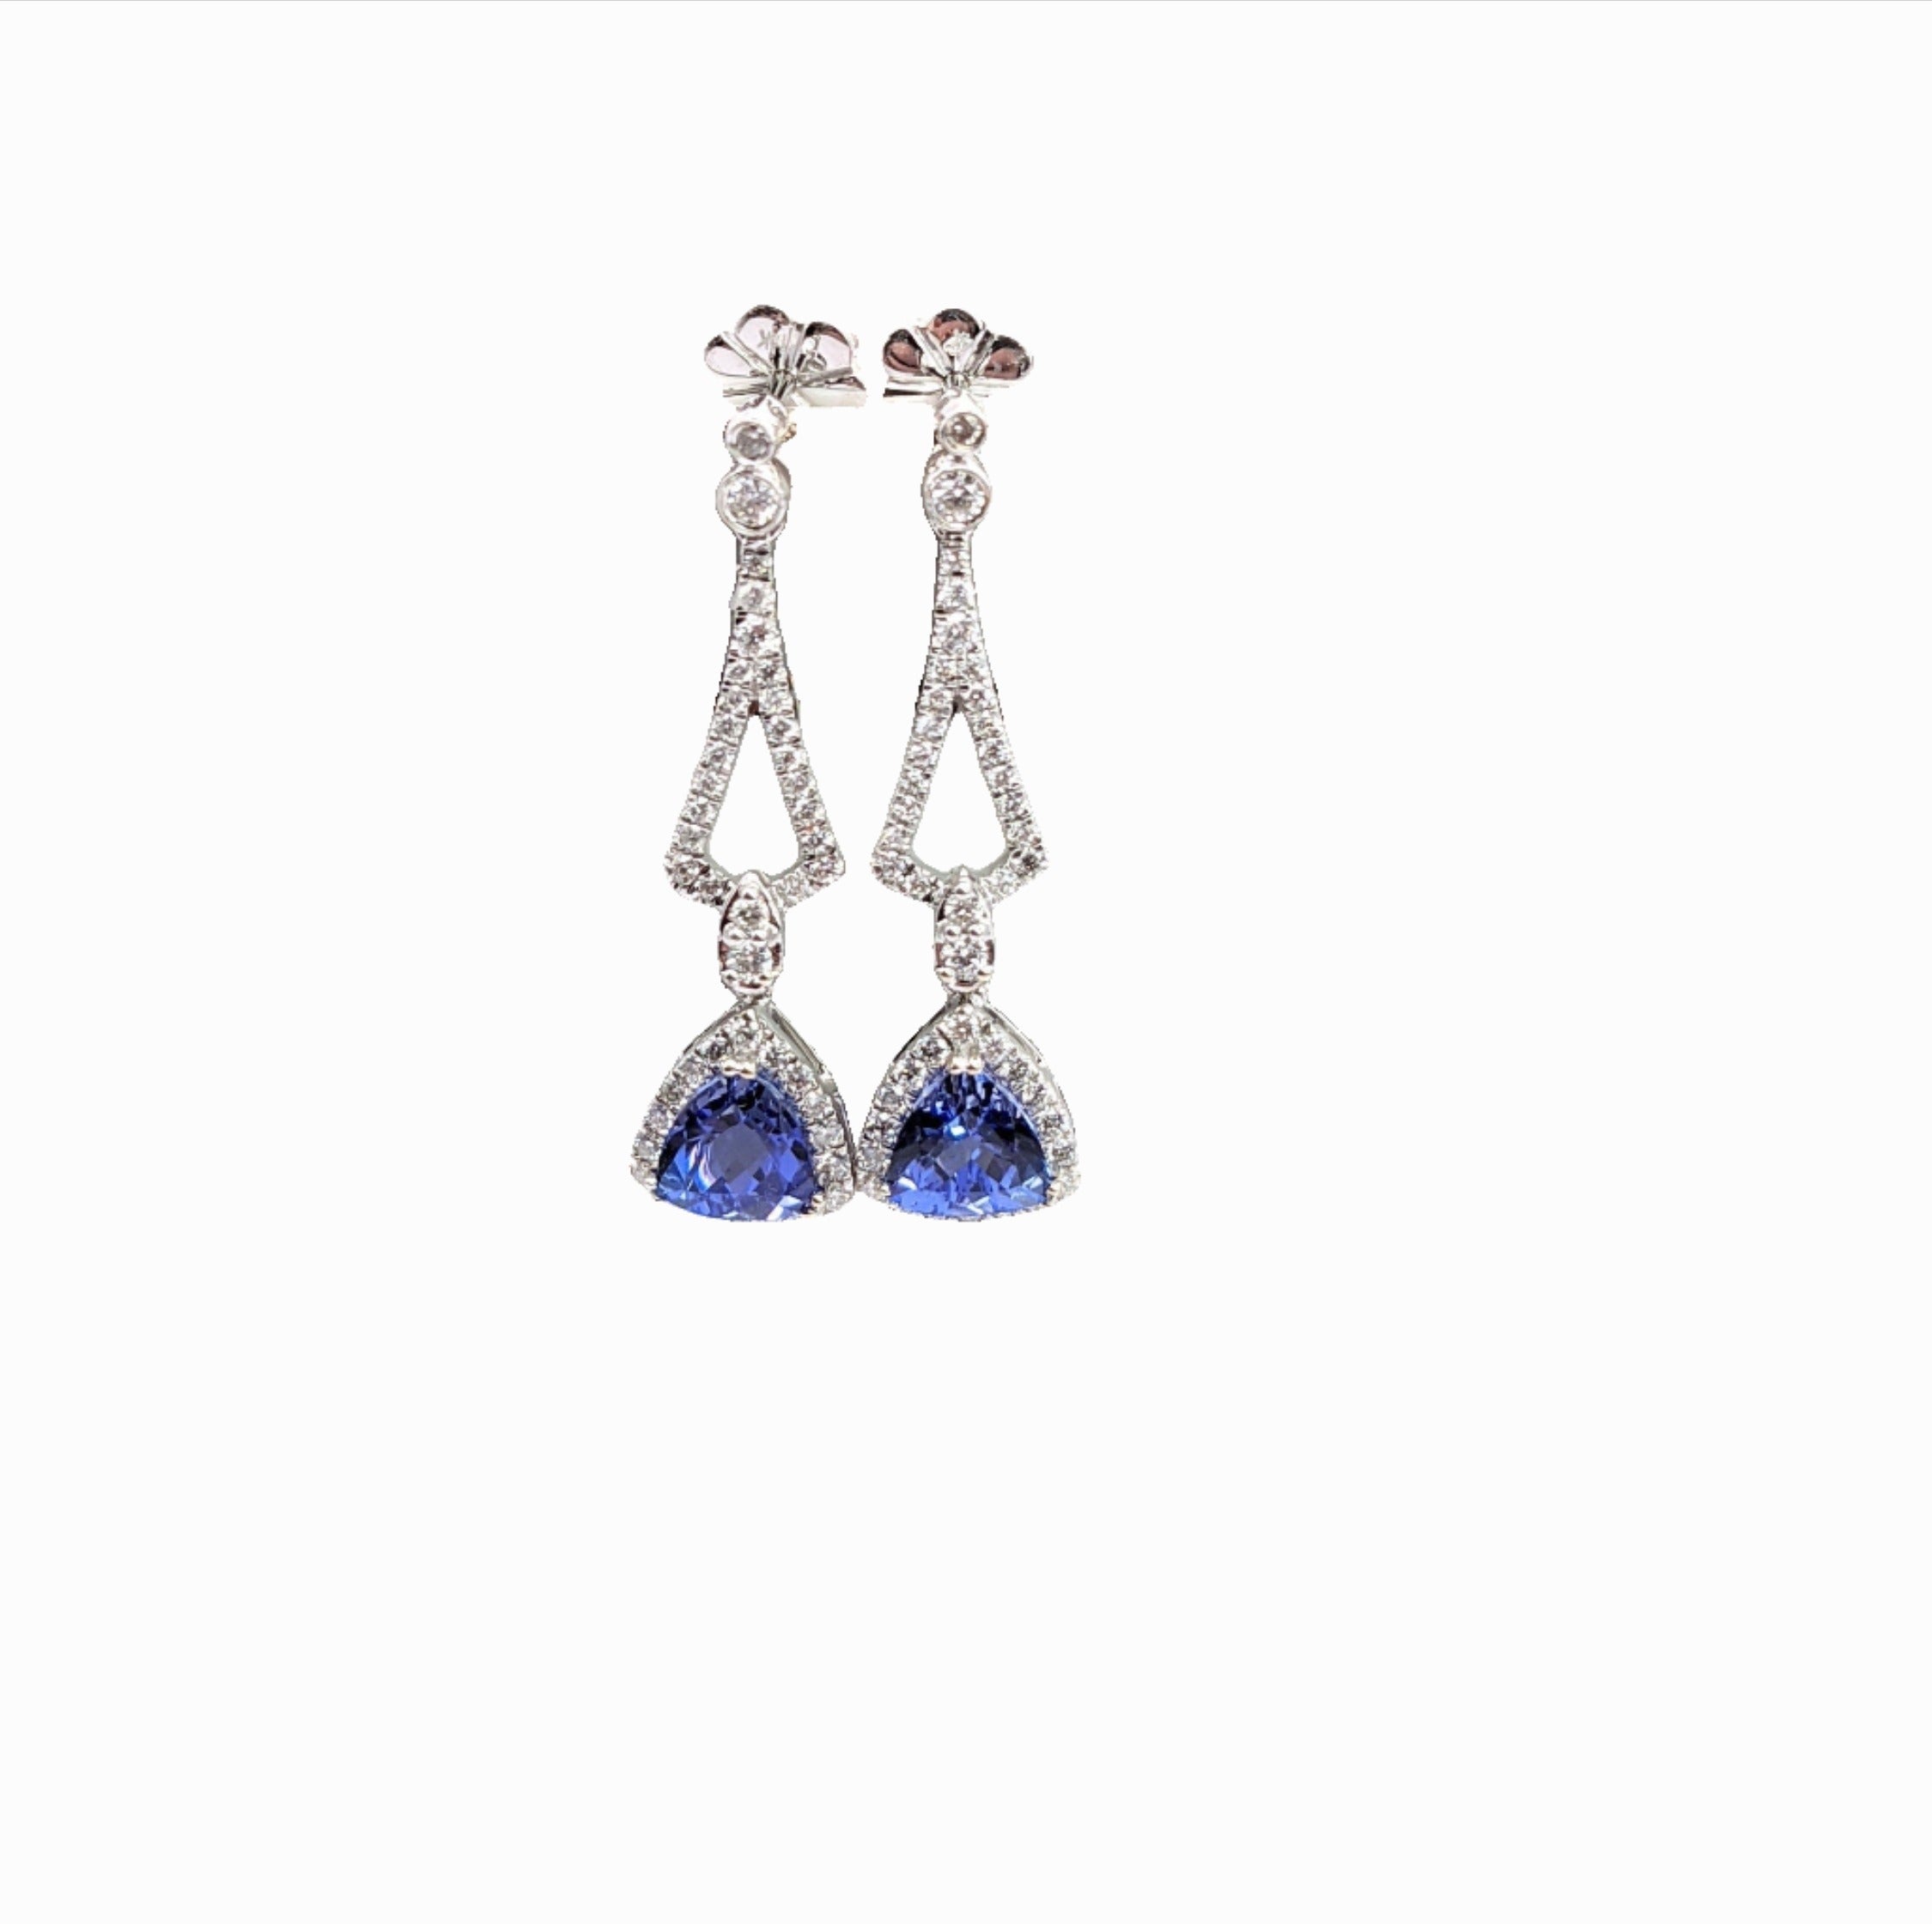 Blue Tanzanite Dangle Earrings w Natural Diamond Accents in Solid 14k White Gold / Trillion Shape 6x6mm / Push Back / Customizable Jewelry